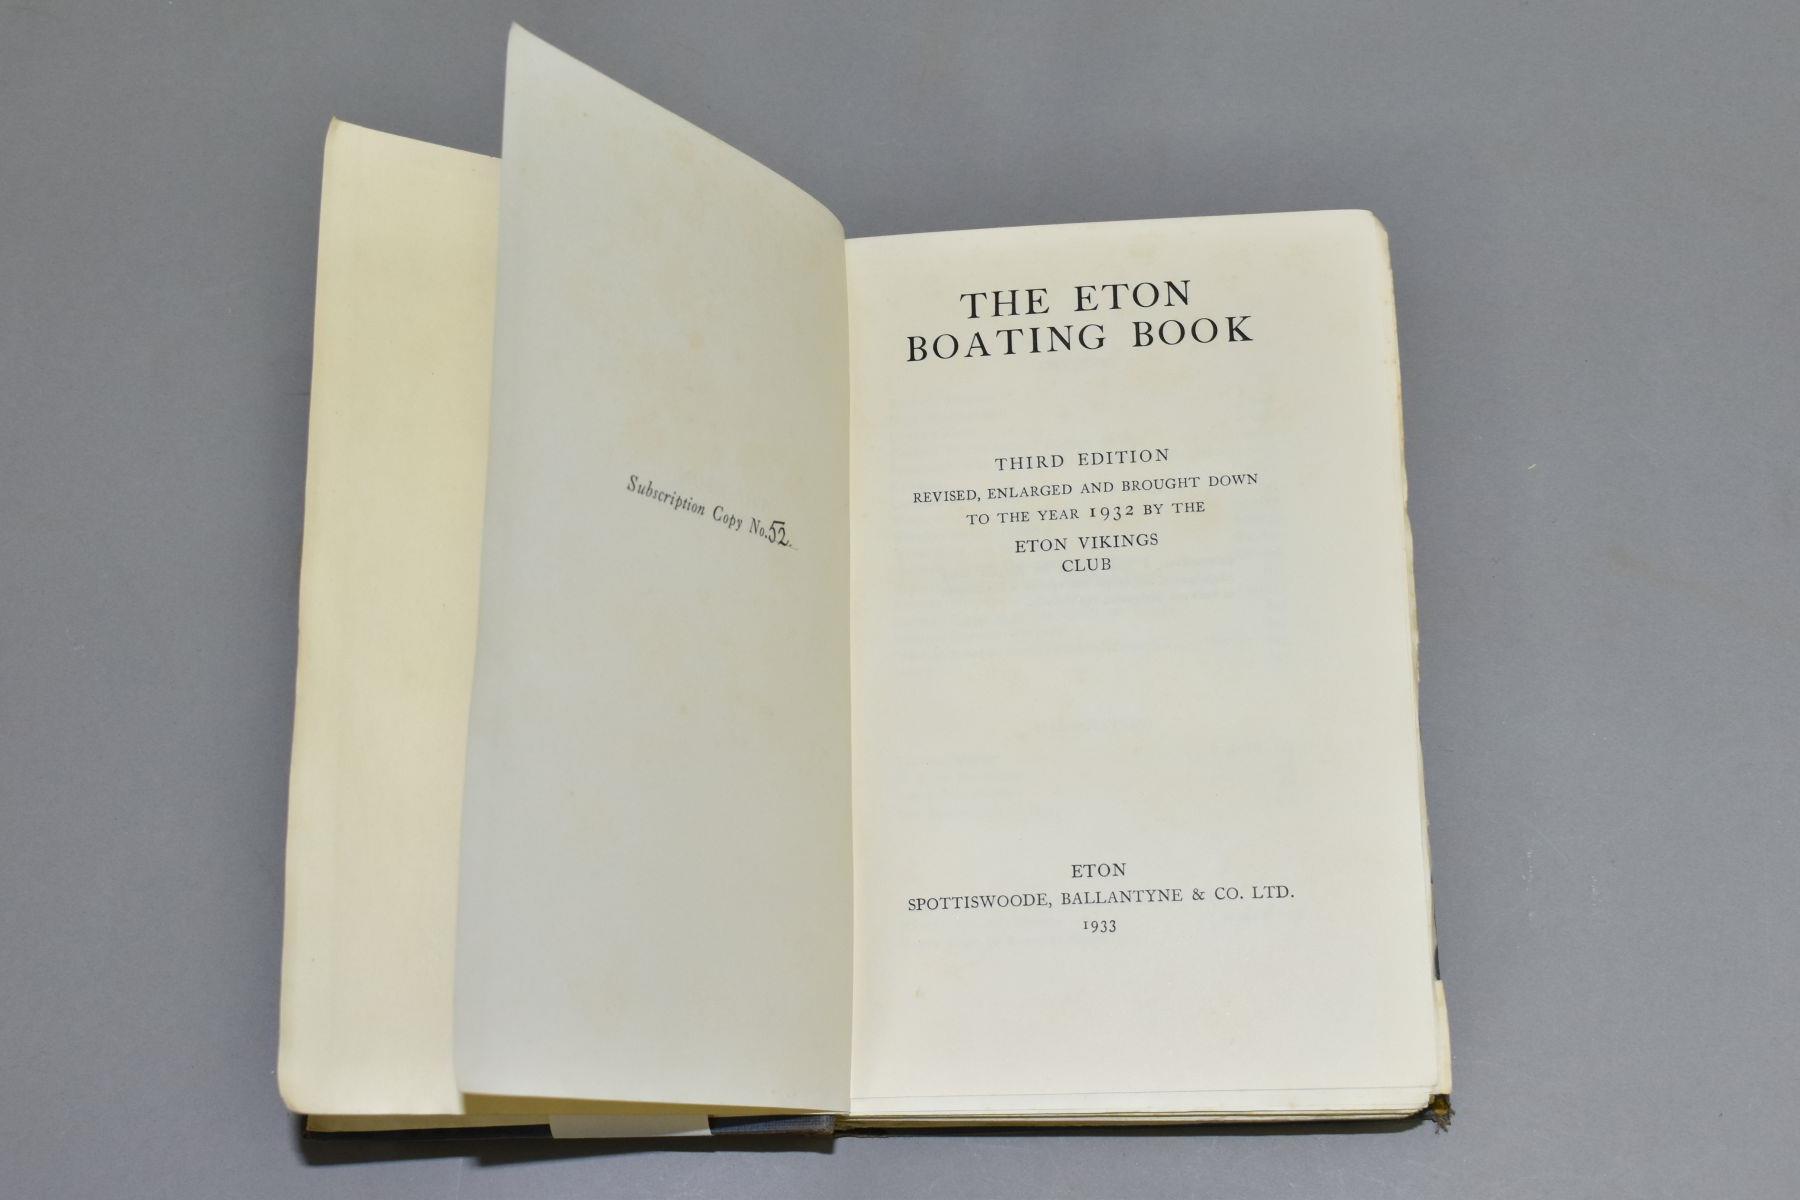 THE ETON BOATING BOOK, third edition 1933, copy No 52 of subscribers edition